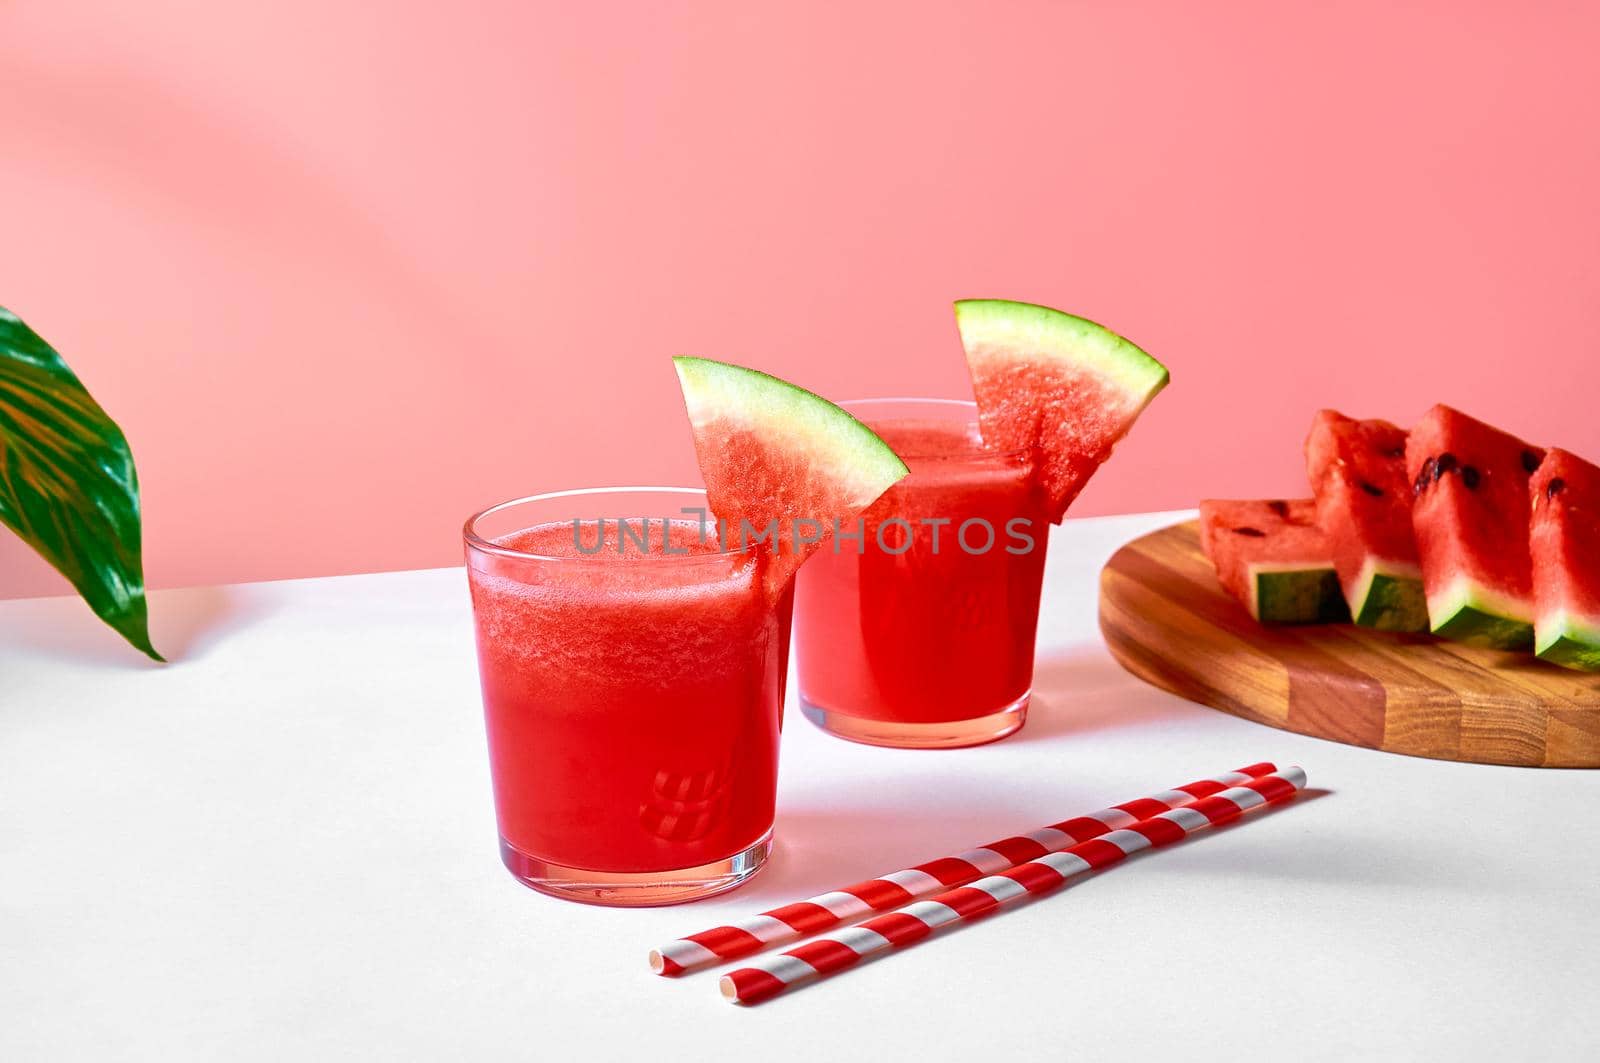 Fresh watermelon juice or smoothie in glasses with watermelon pieces on wooden board on pink background. Refreshing summer drink.